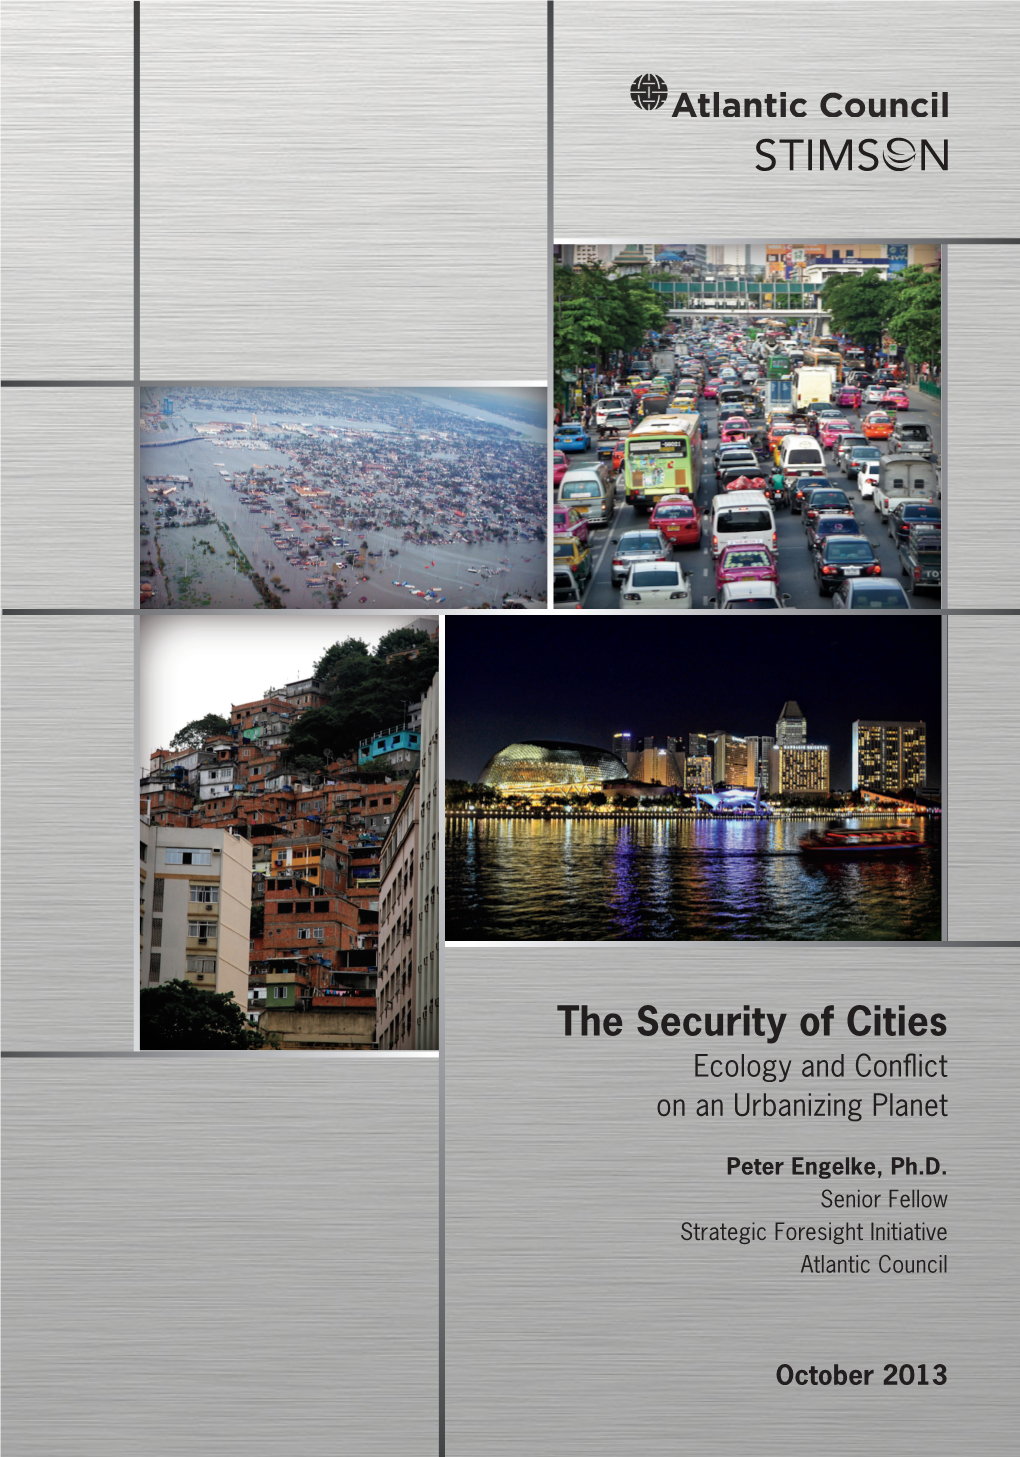 The Security of Cities Ecology and Conflict on an Urbanizing Planet